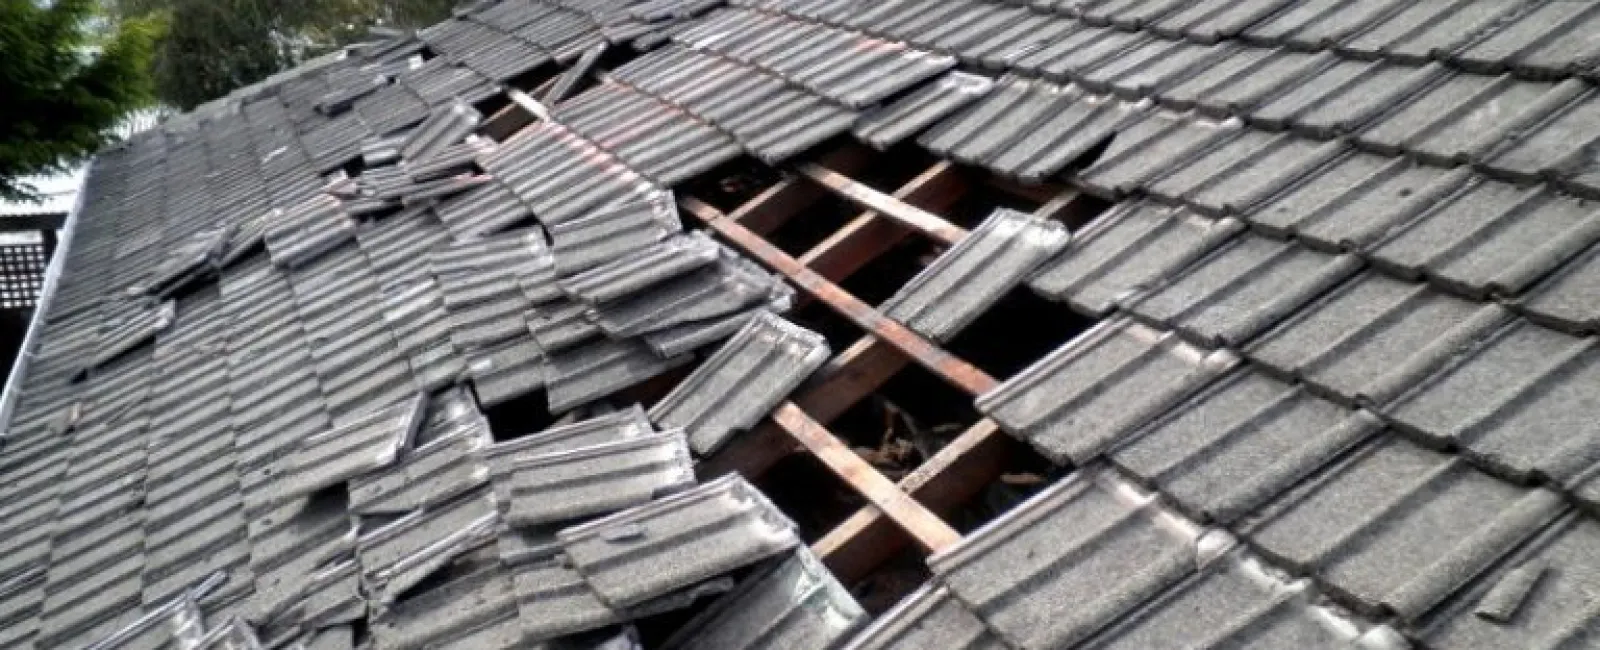 Signs of Roof Damage